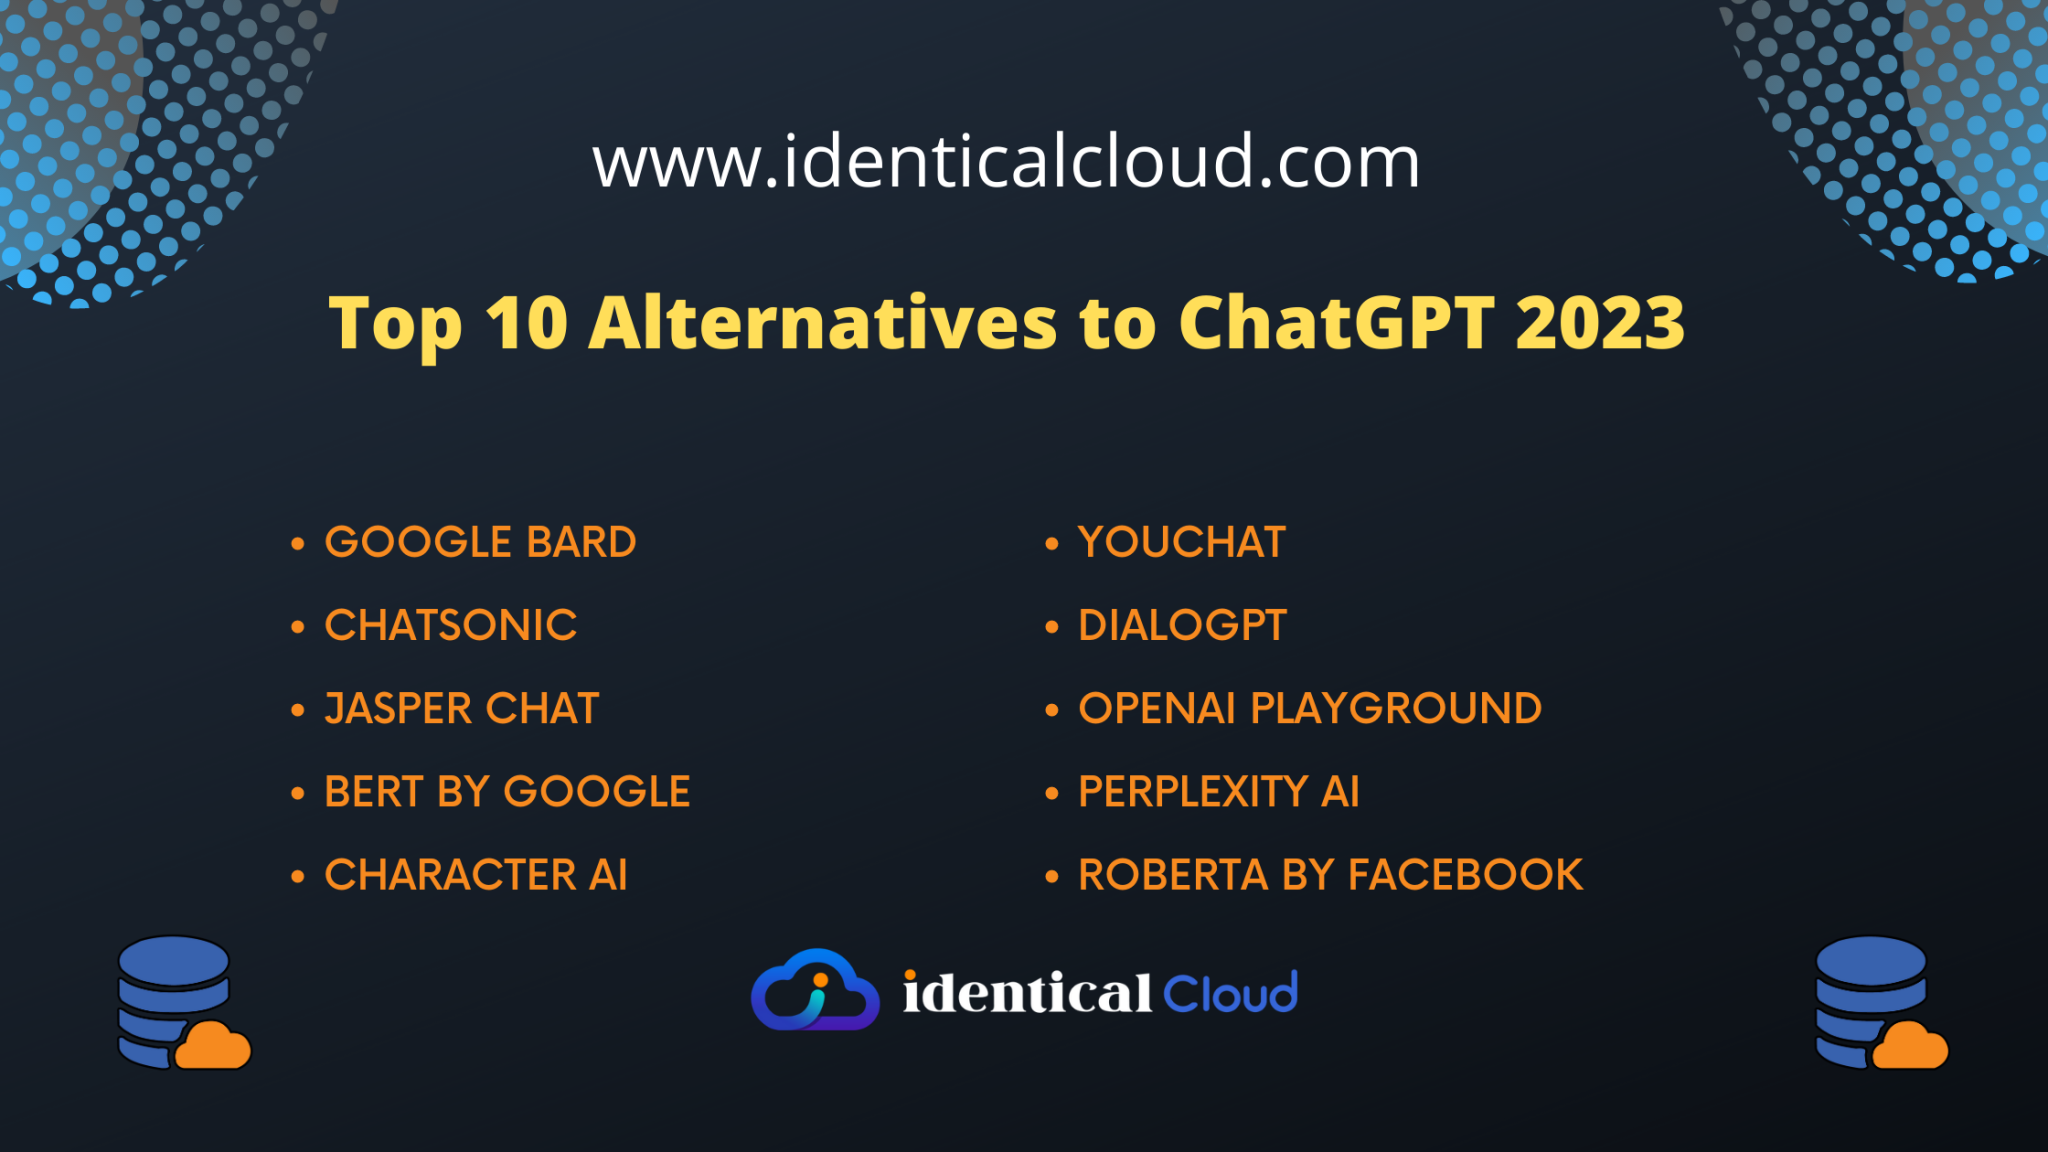 Top 10 Alternatives to ChatGPT 2023 identical Cloud